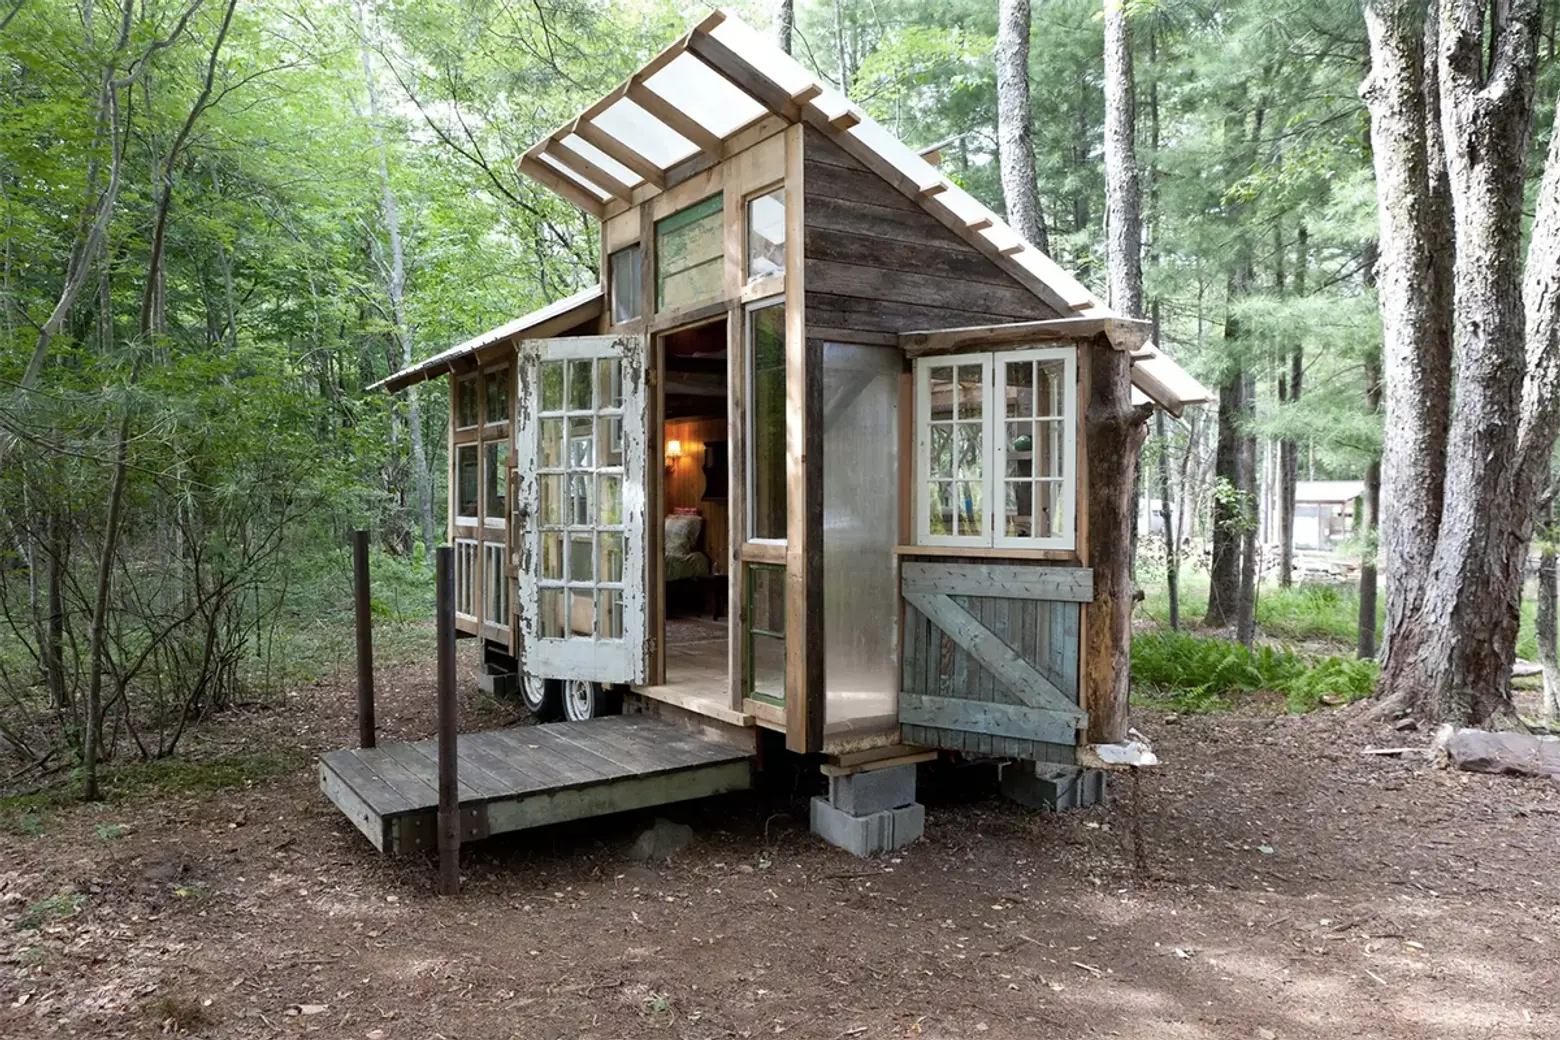 https://thumbs.6sqft.com/wp-content/uploads/2016/07/13122354/tiny-house-cabin-in-the-catskills-ny2.jpg?w=1560&format=webp